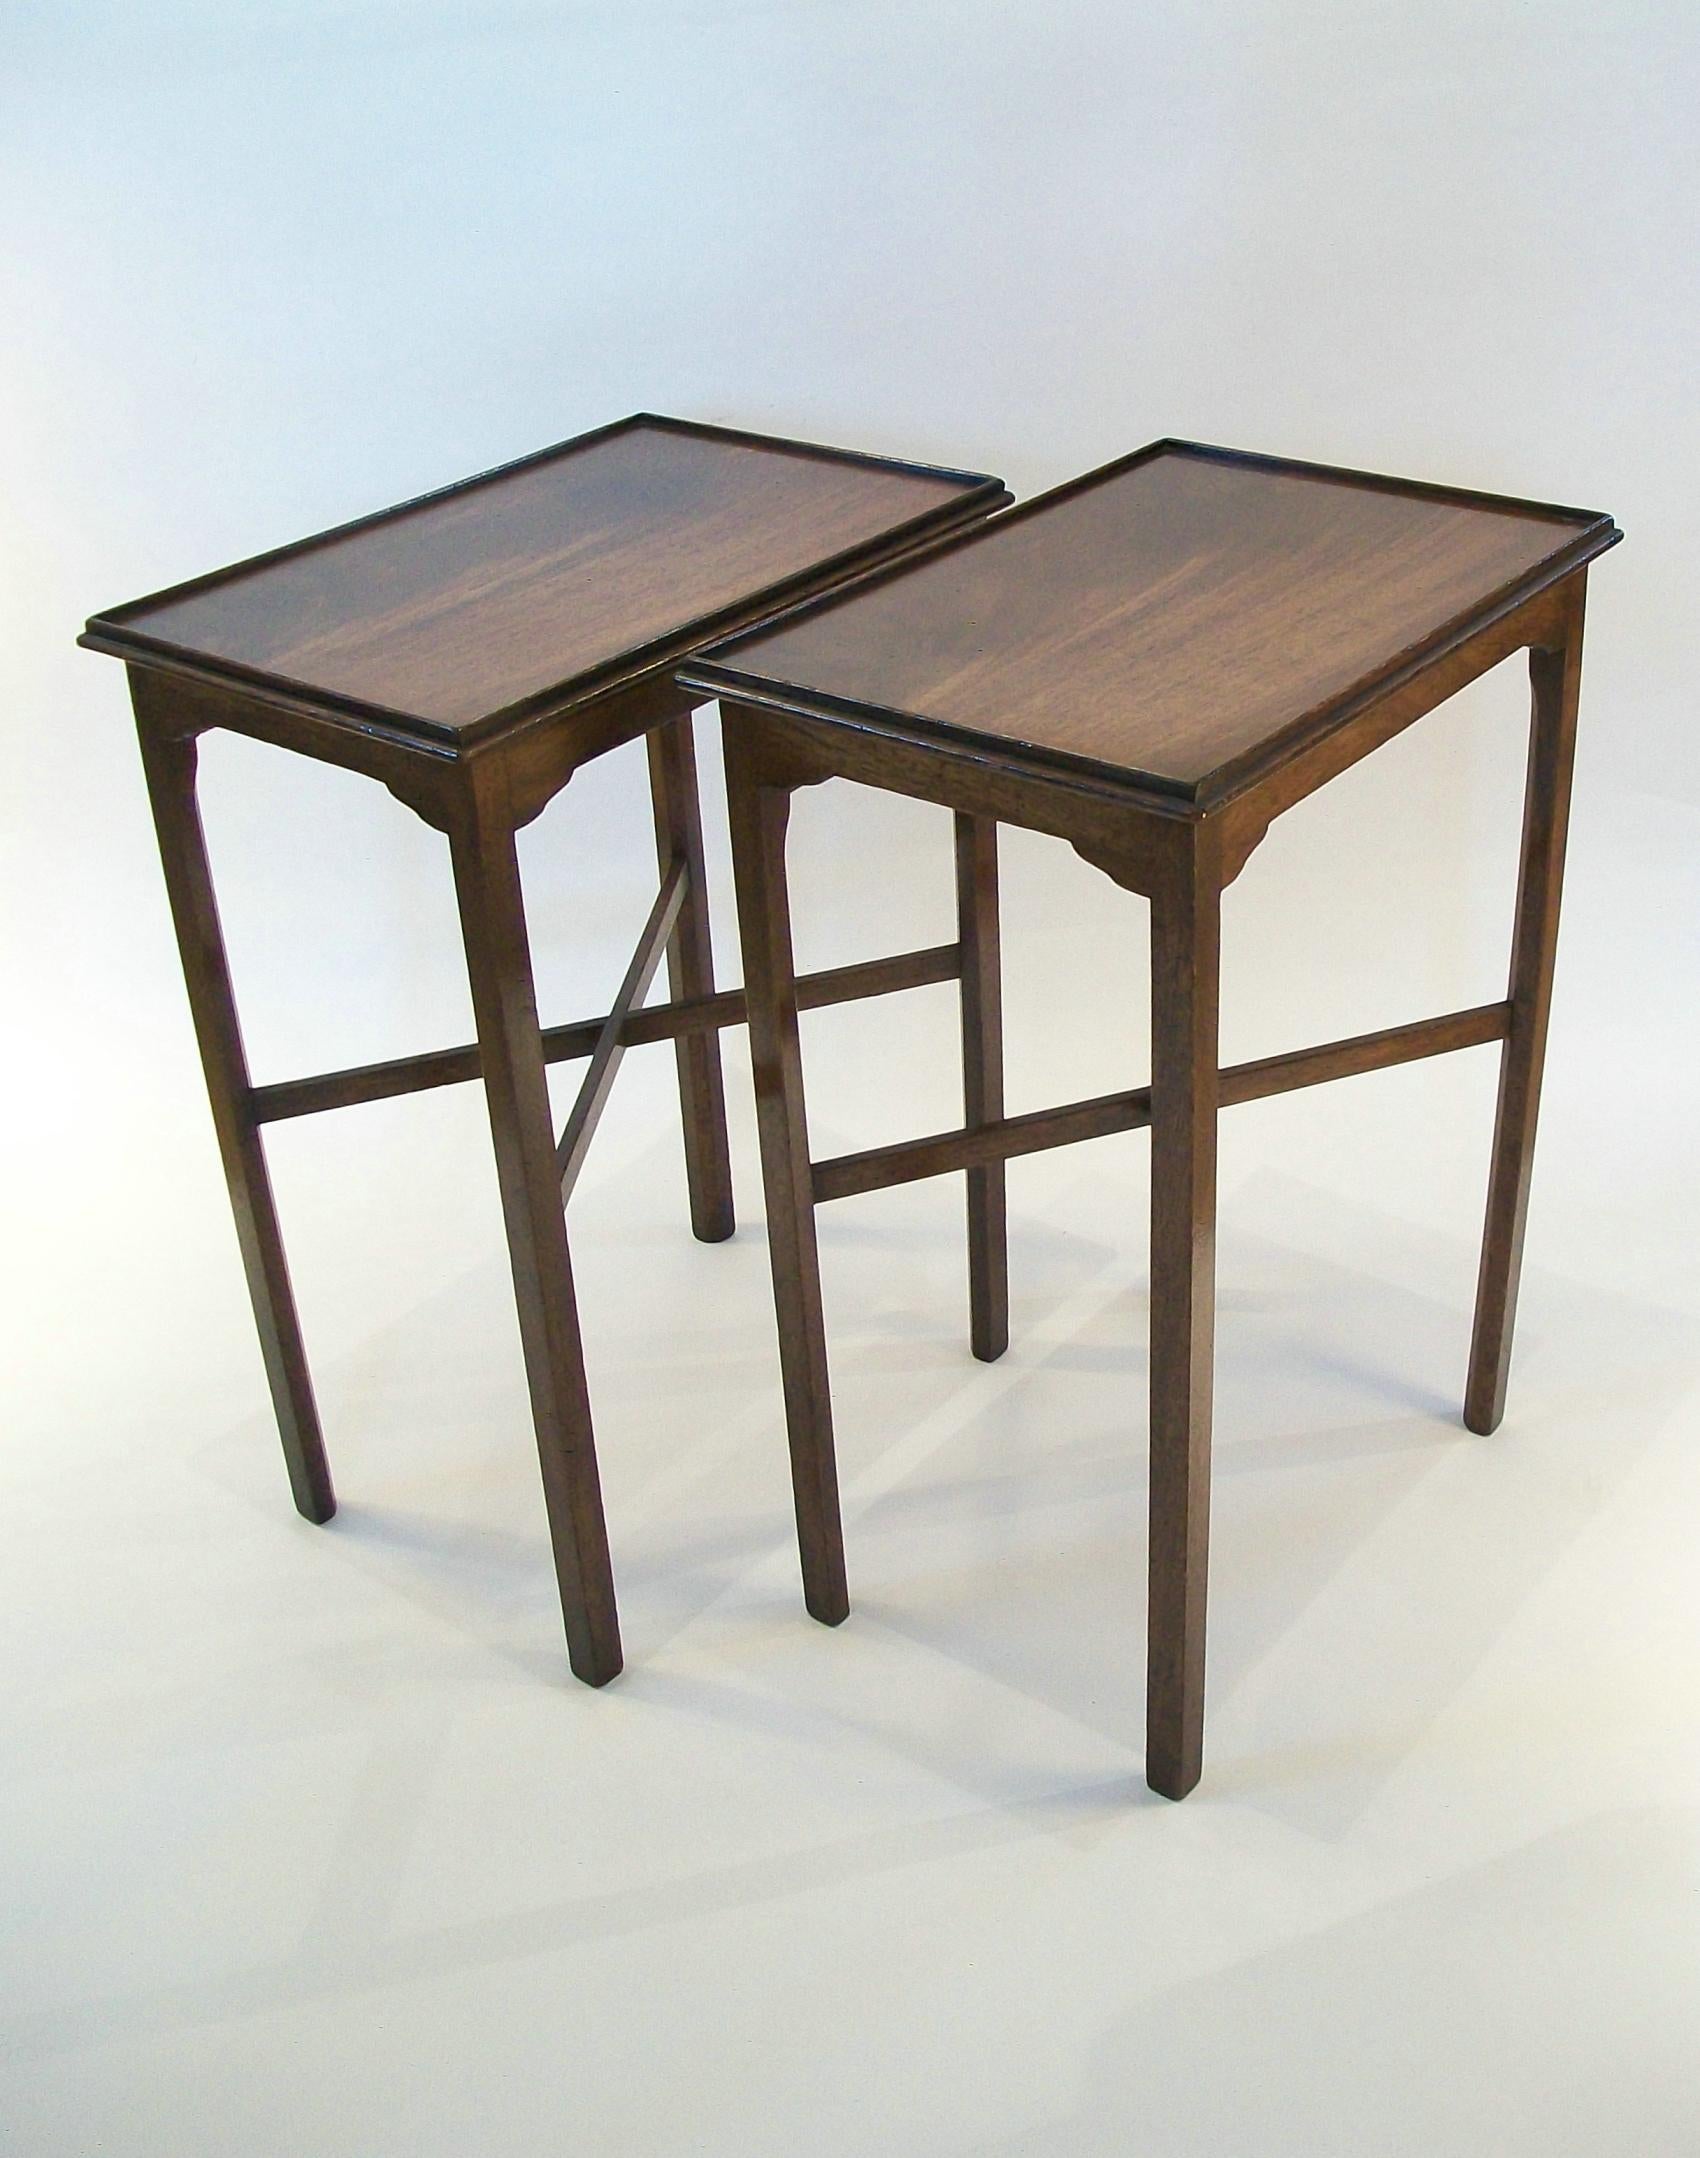 Hand-Crafted Fine Pair of Georgian Style Flamed Hardwood Side Tables - U.K. - Circa 1950's For Sale